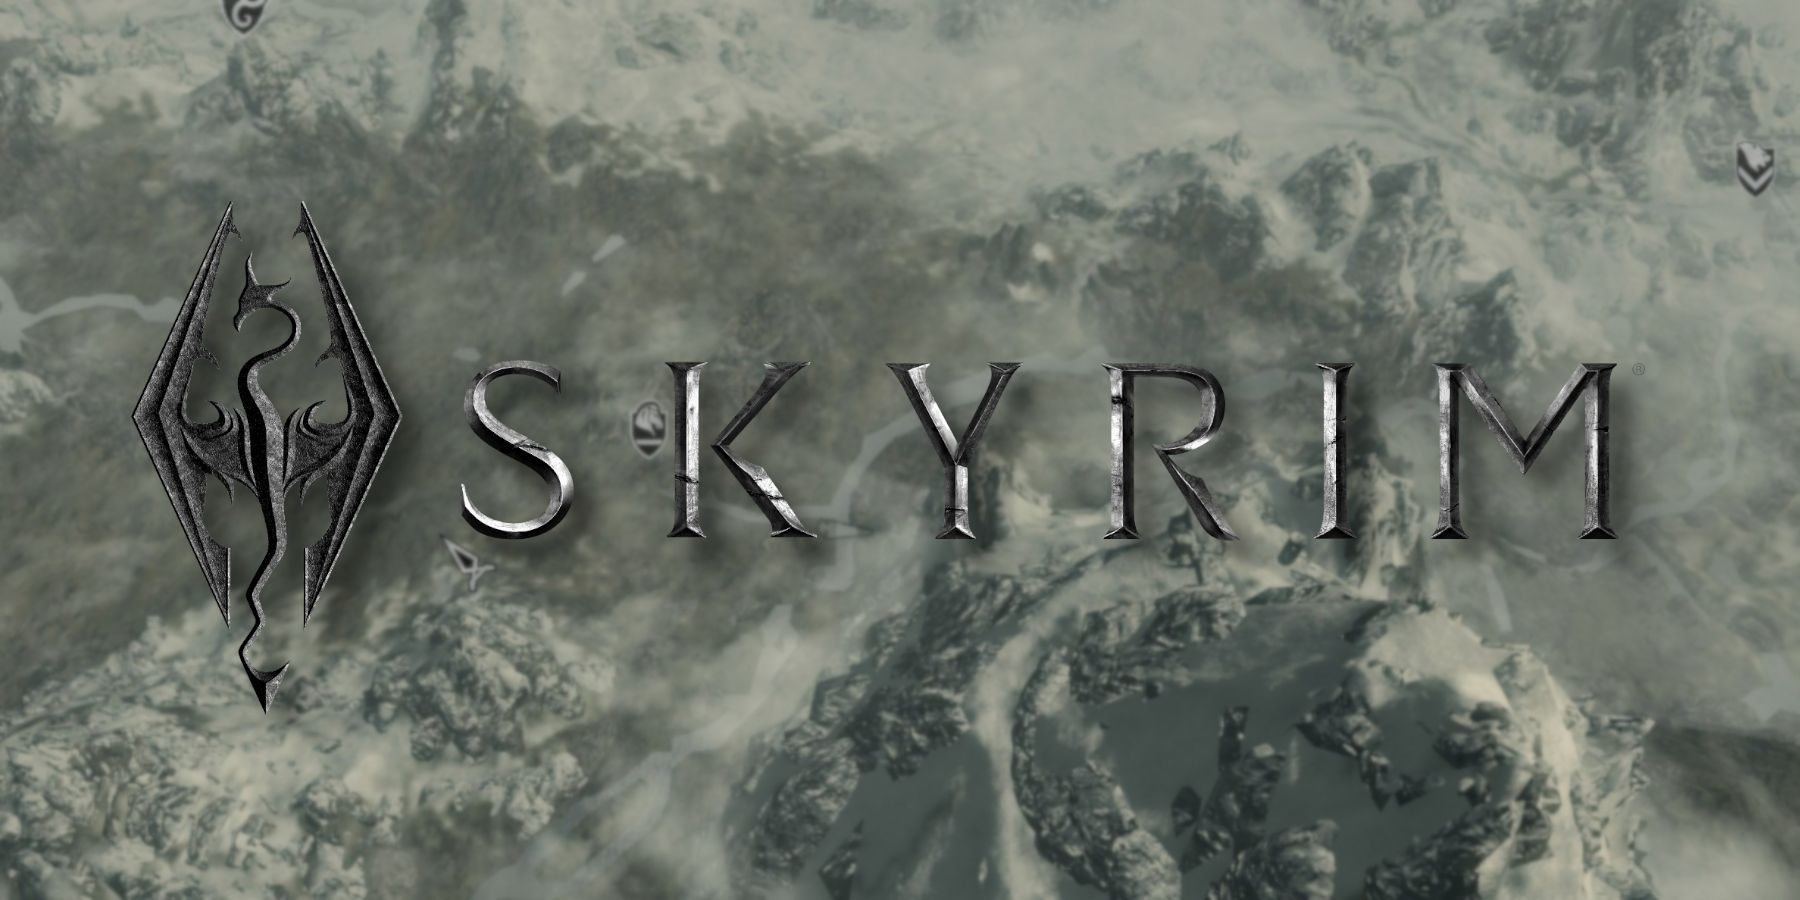 The Skyrim logo with the game's map behind it.